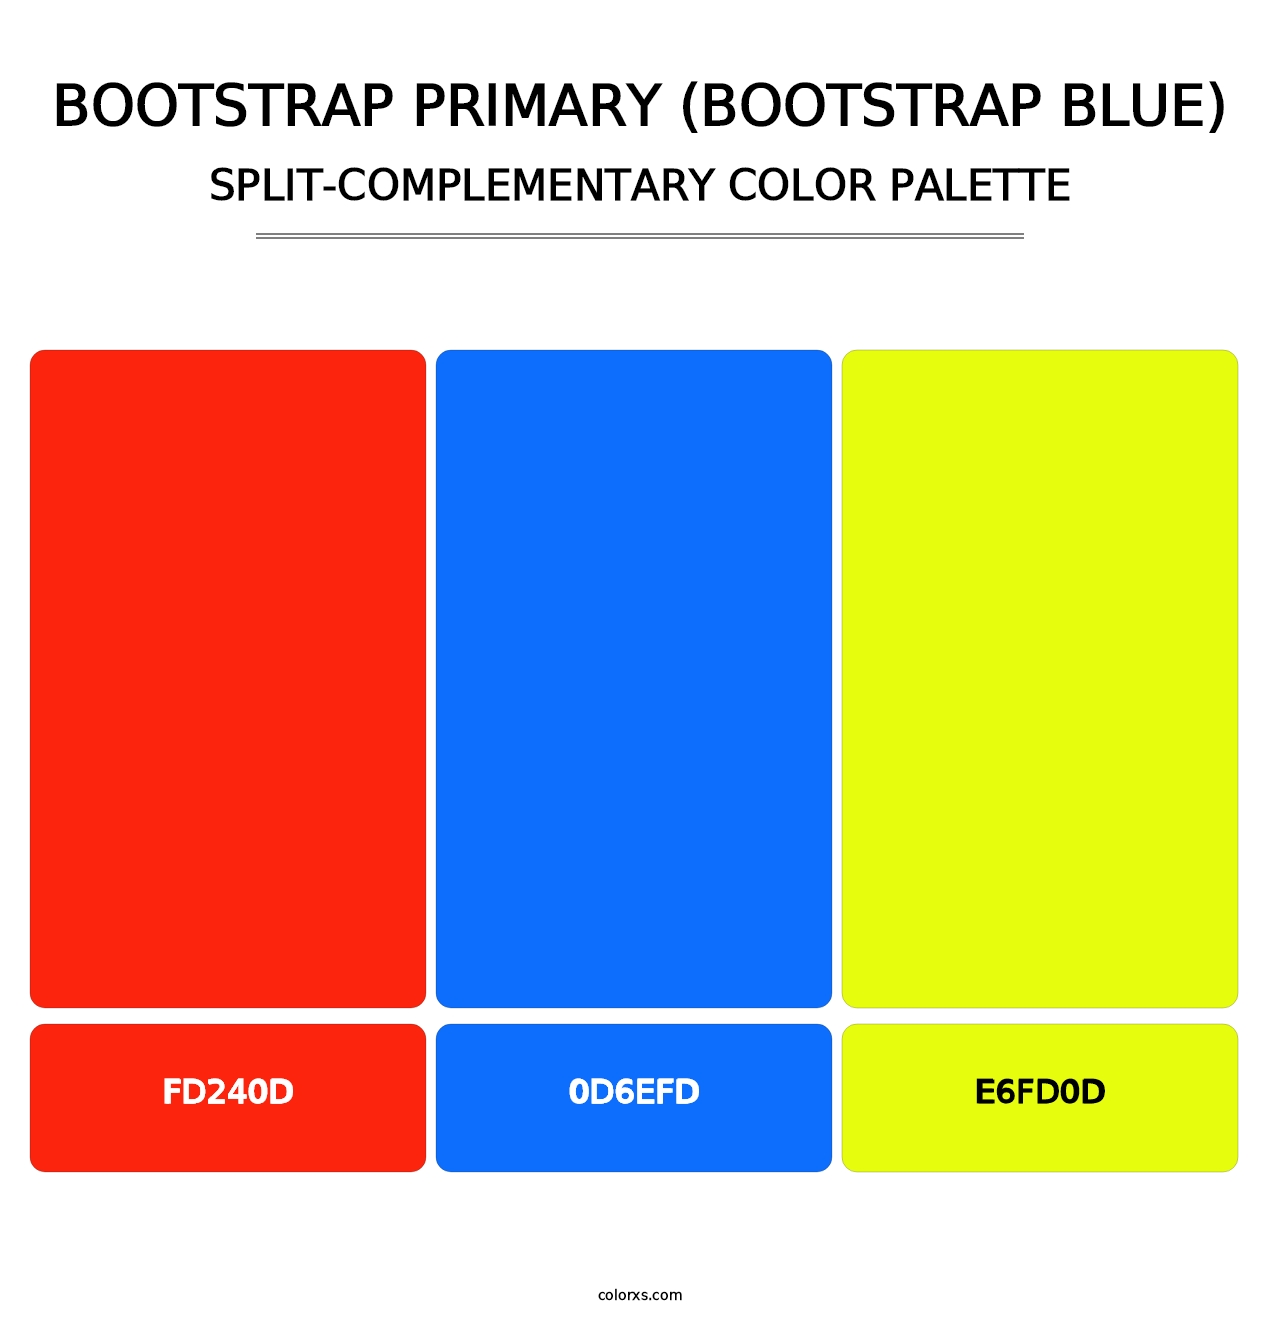 Bootstrap Primary (Bootstrap Blue) - Split-Complementary Color Palette